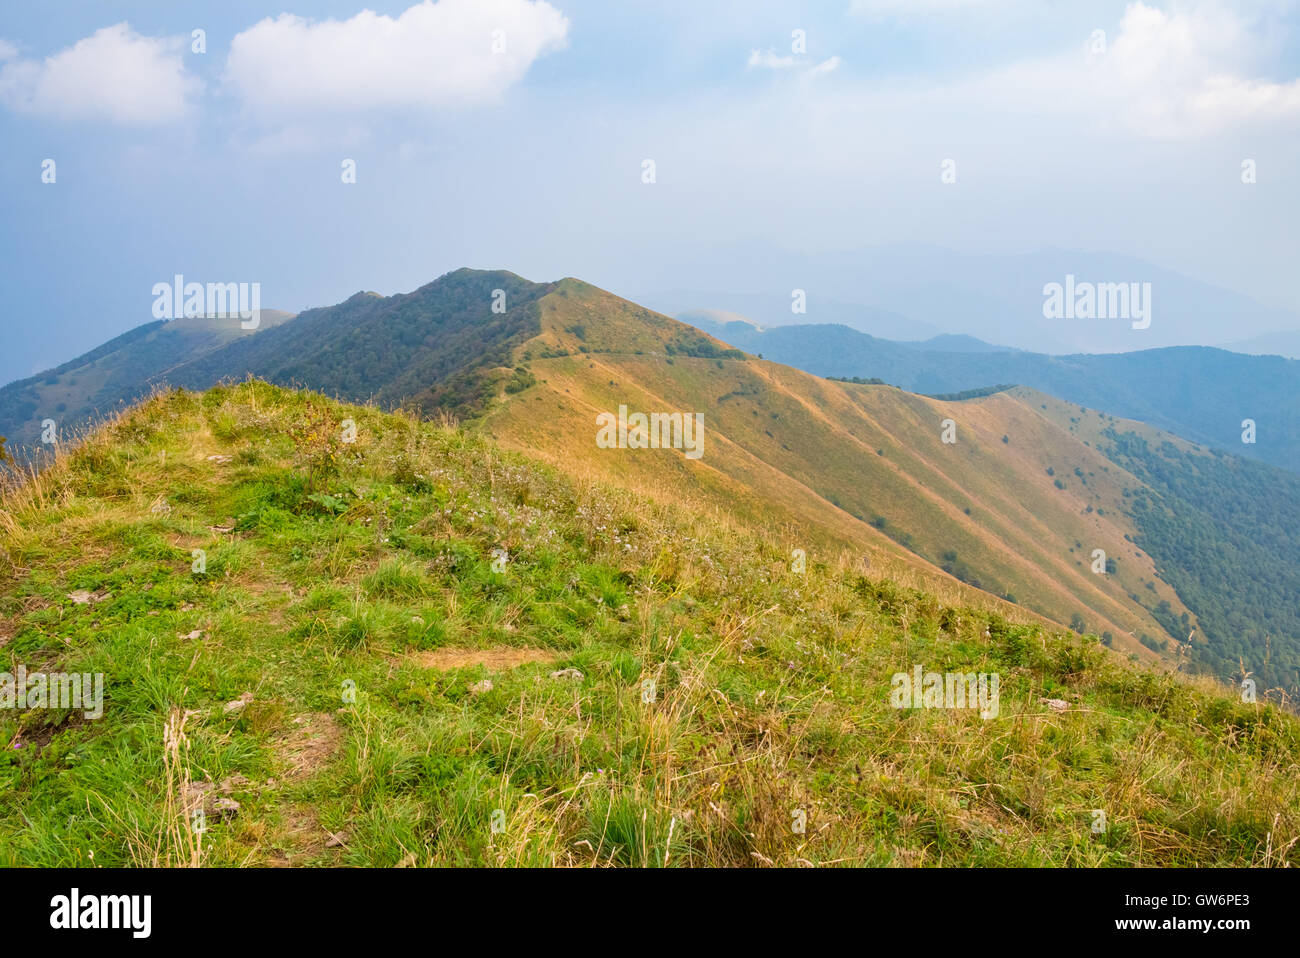 Landscape from the top of a mountain with lake in the background Stock Photo